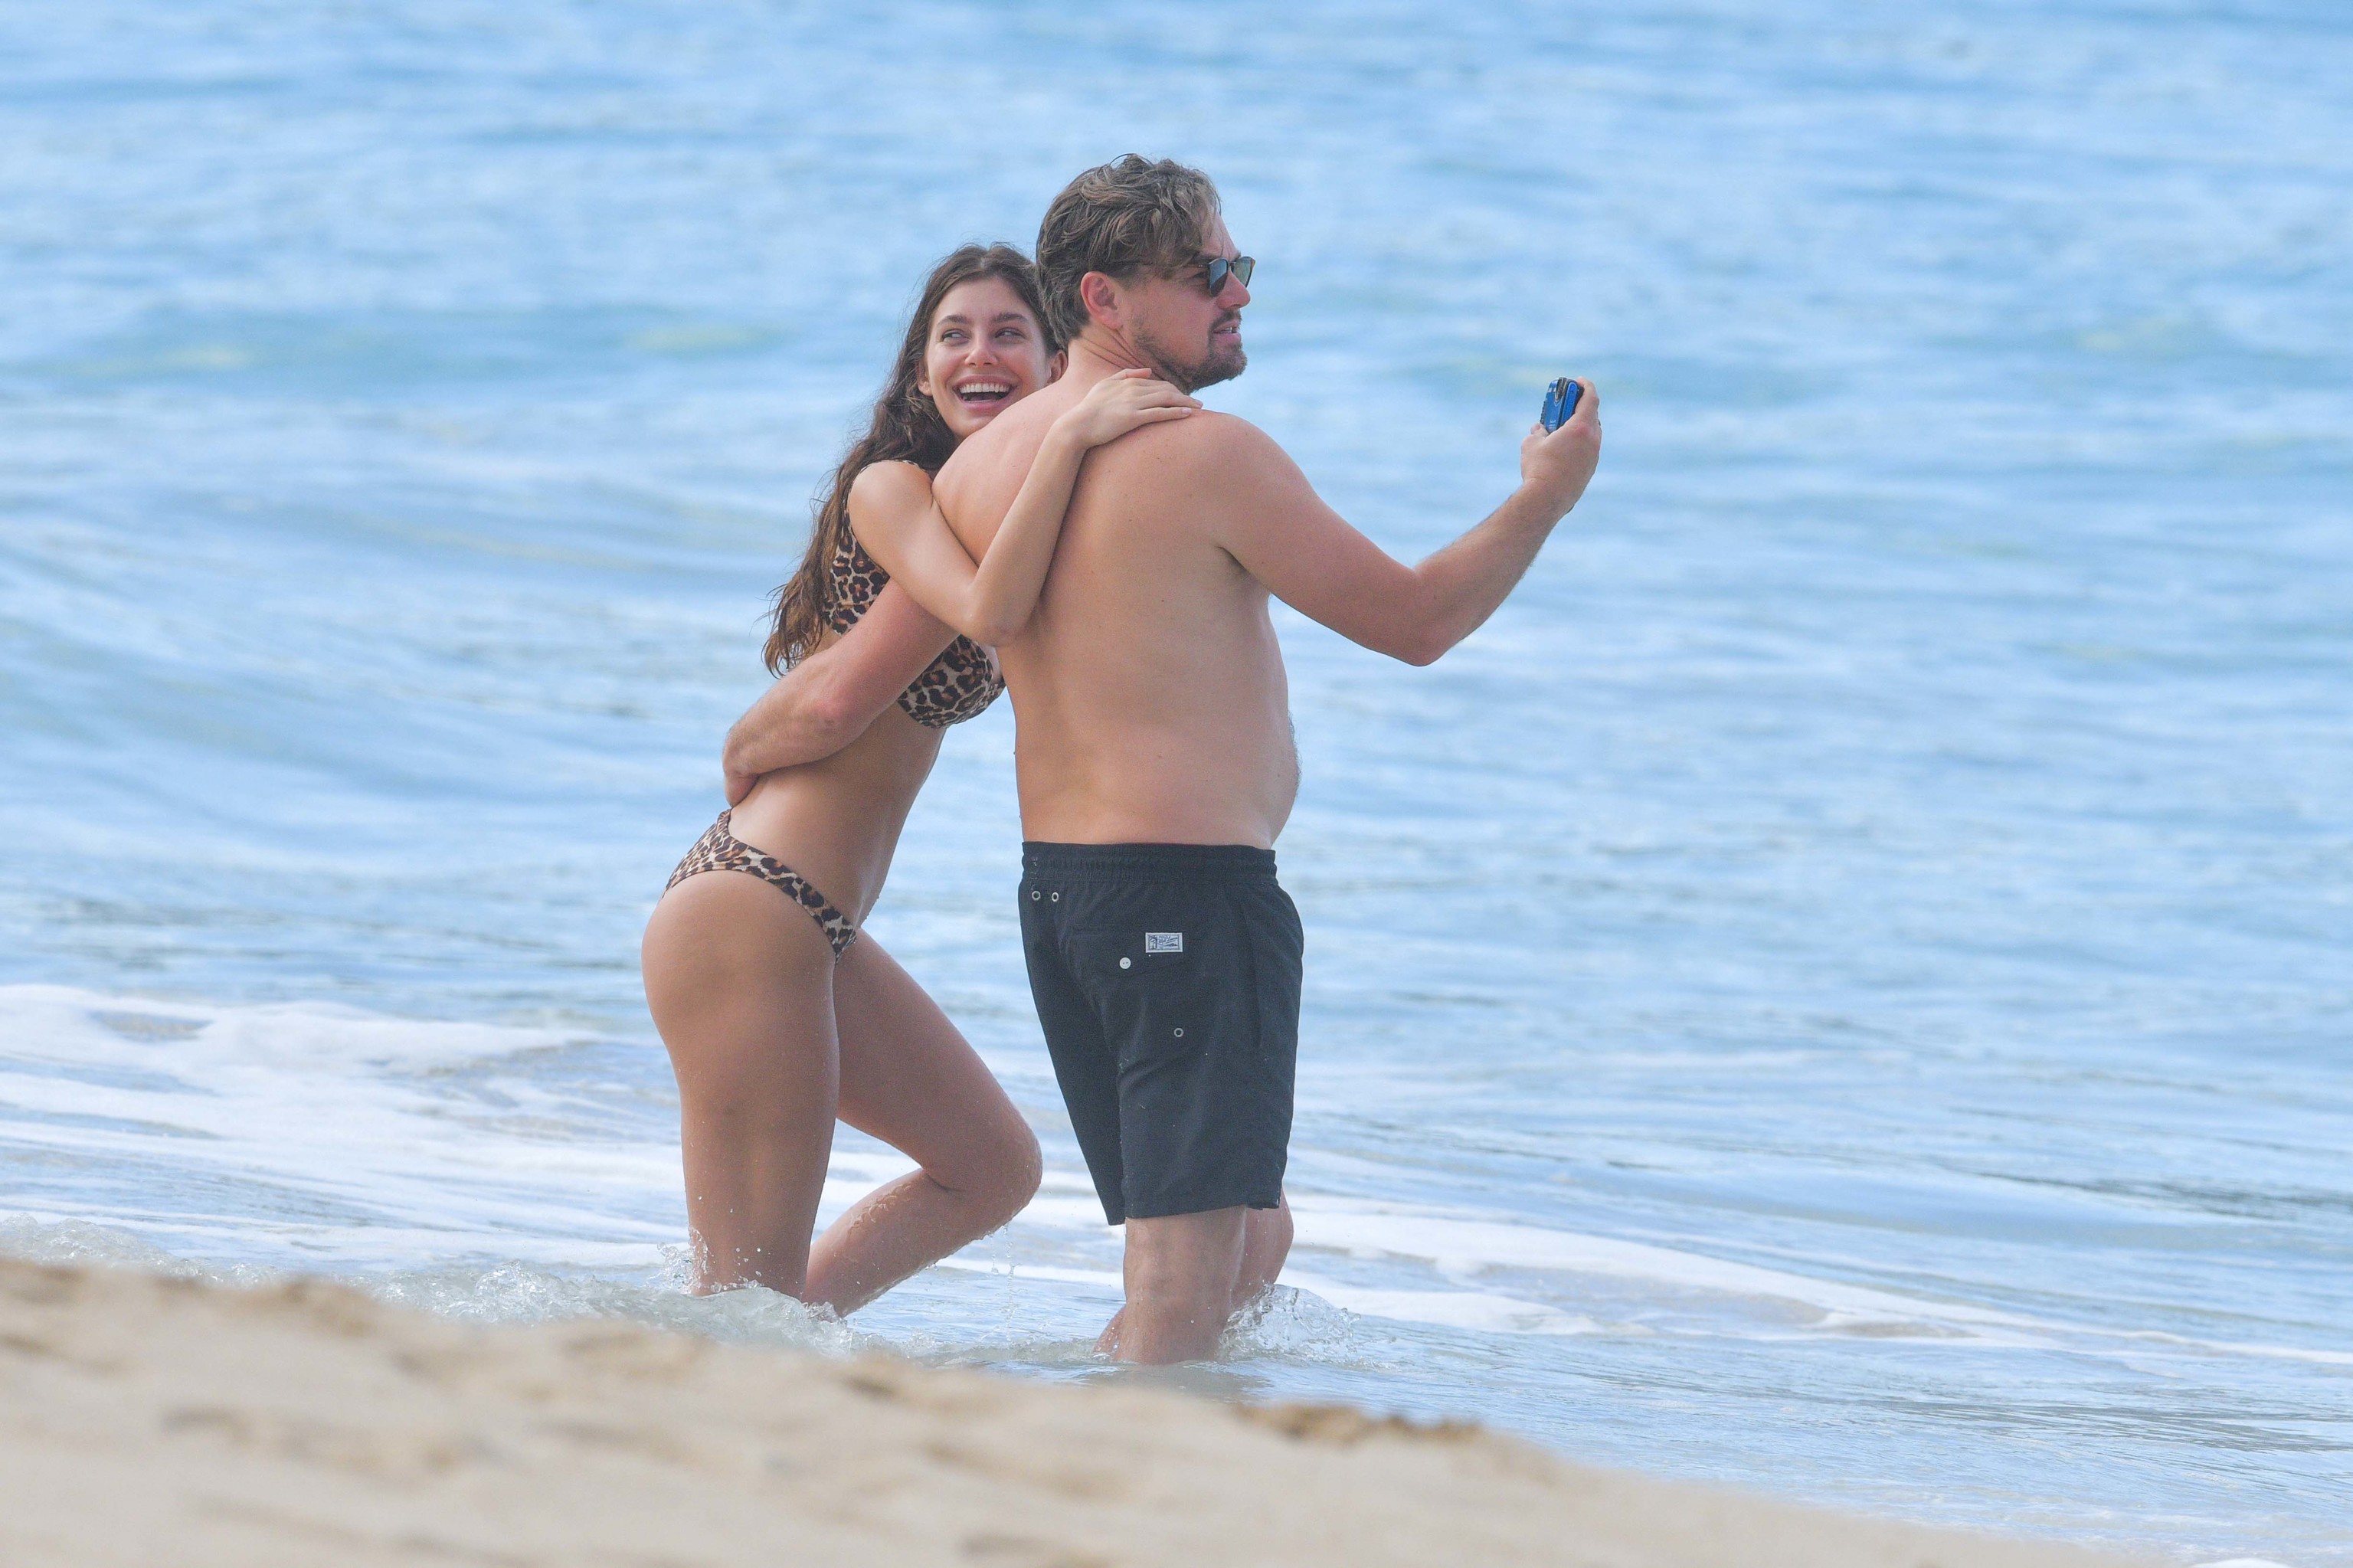 Leonardo Dicaprio And Camila Morrone Break And Revive The Theory That The Actor Does Not Have 